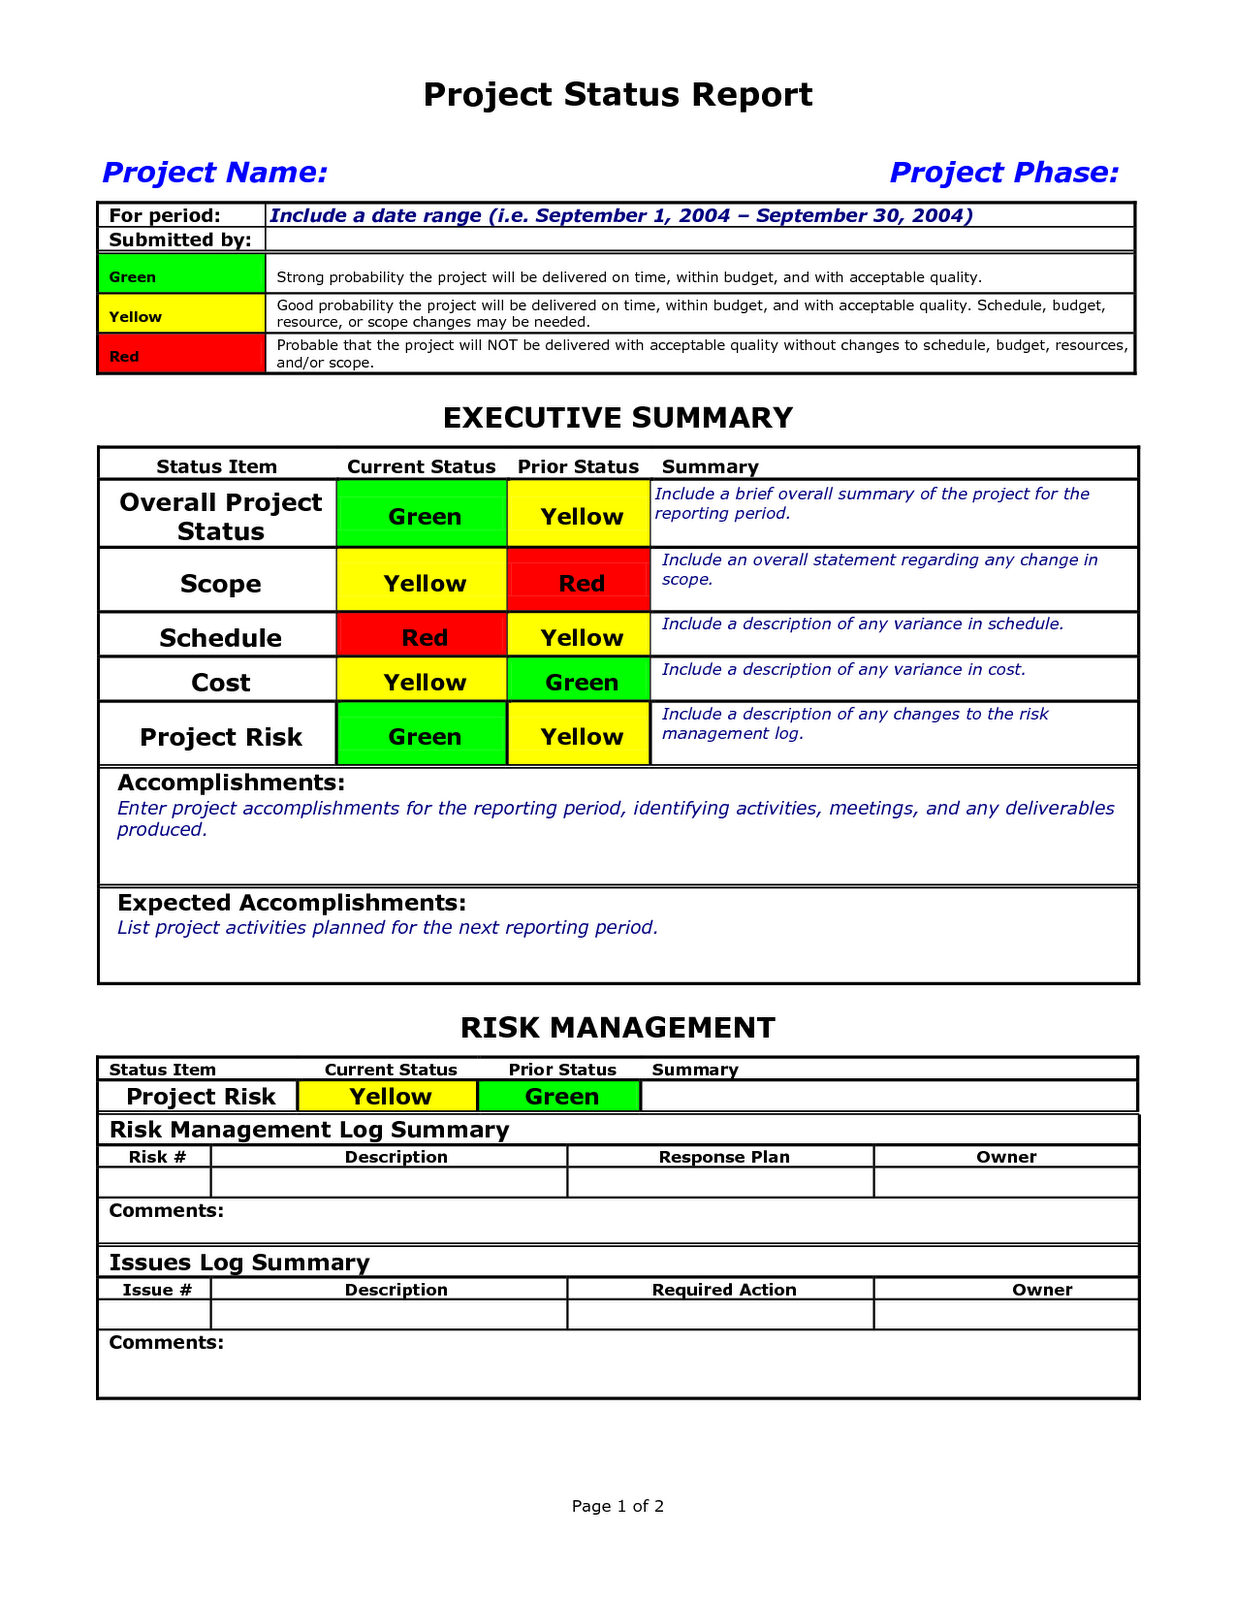 Agile Project Status Report Template With Executive Summary Project Status Report Template